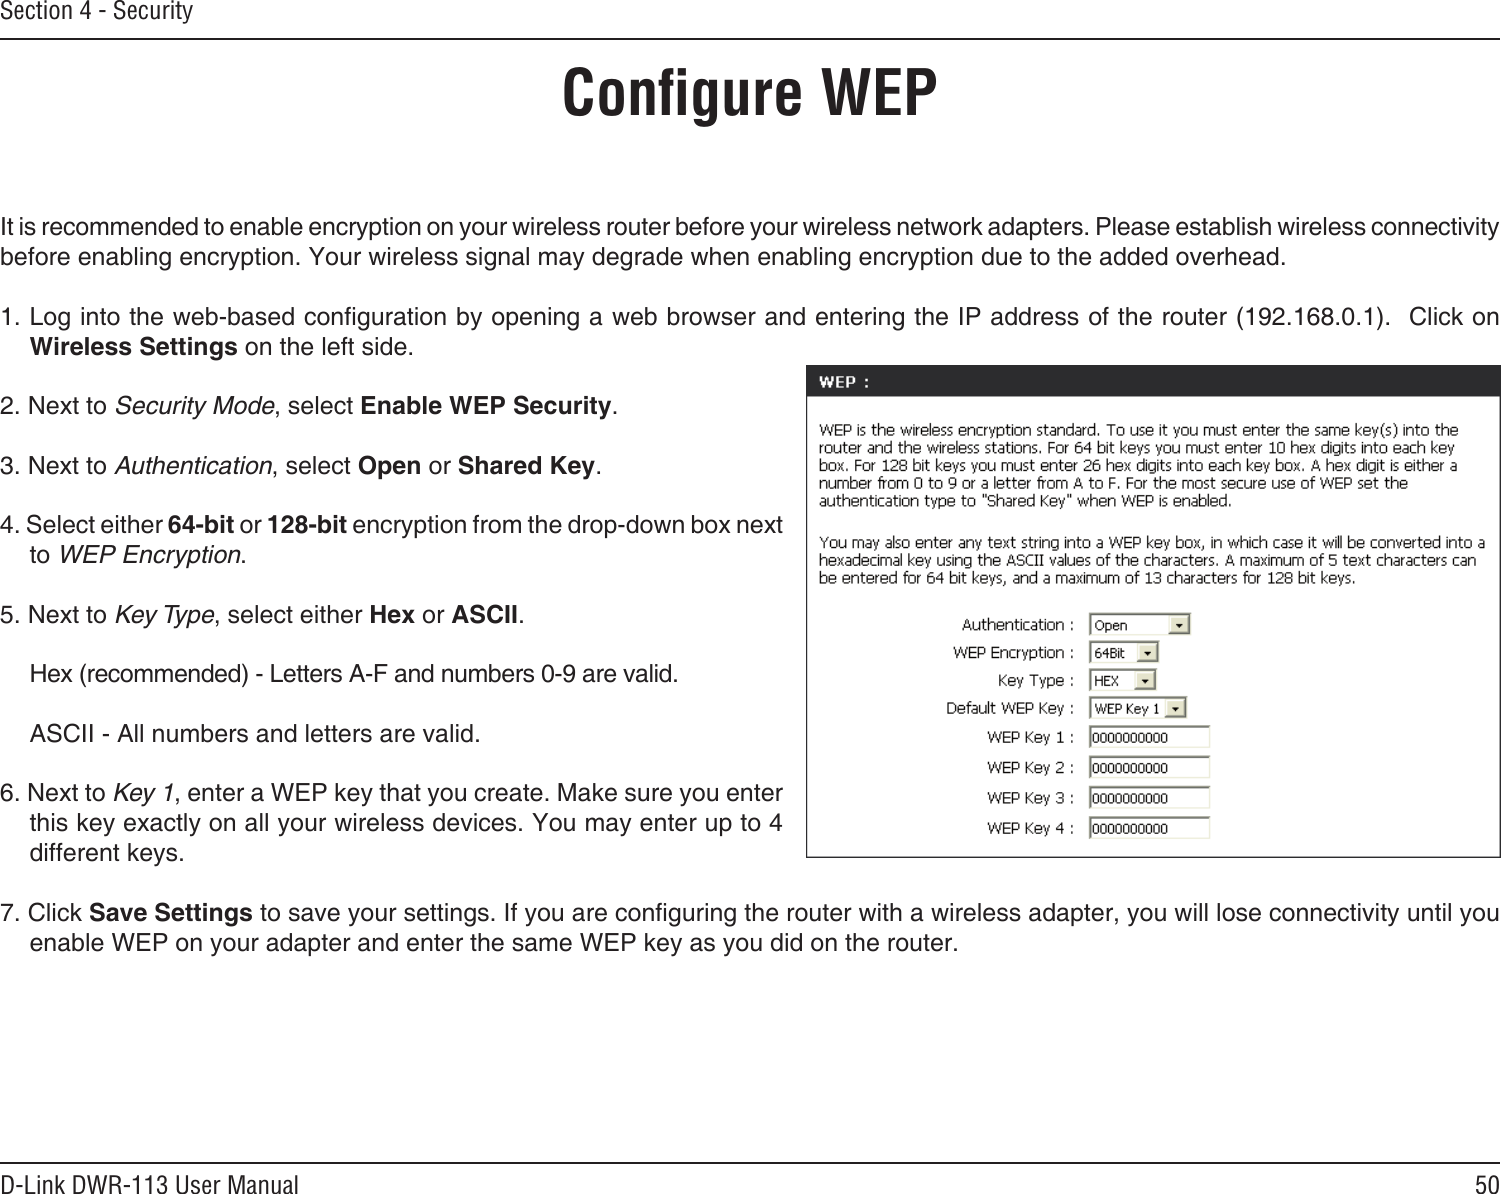 50D-Link DWR-113 User ManualSection 4 - SecurityConﬁgure WEPIt is recommended to enable encryption on your wireless router before your wireless network adapters. Please establish wireless connectivity before enabling encryption. Your wireless signal may degrade when enabling encryption due to the added overhead.1. Log into the web-based conguration by opening a web browser and entering the IP address of the router (192.168.0.1).  Click on Wireless Settings on the left side.2. Next to Security Mode, select Enable WEP Security.3. Next to Authentication, select Open or Shared Key.4. Select either 64-bit or 128-bit encryption from the drop-down box next to WEP Encryption. 5. Next to Key Type, select either Hex or ASCII.  Hex (recommended) - Letters A-F and numbers 0-9 are valid.  ASCII - All numbers and letters are valid.6. Next to Key 1, enter a WEP key that you create. Make sure you enter this key exactly on all your wireless devices. You may enter up to 4 different keys.7. Click Save Settings to save your settings. If you are conguring the router with a wireless adapter, you will lose connectivity until you enable WEP on your adapter and enter the same WEP key as you did on the router.